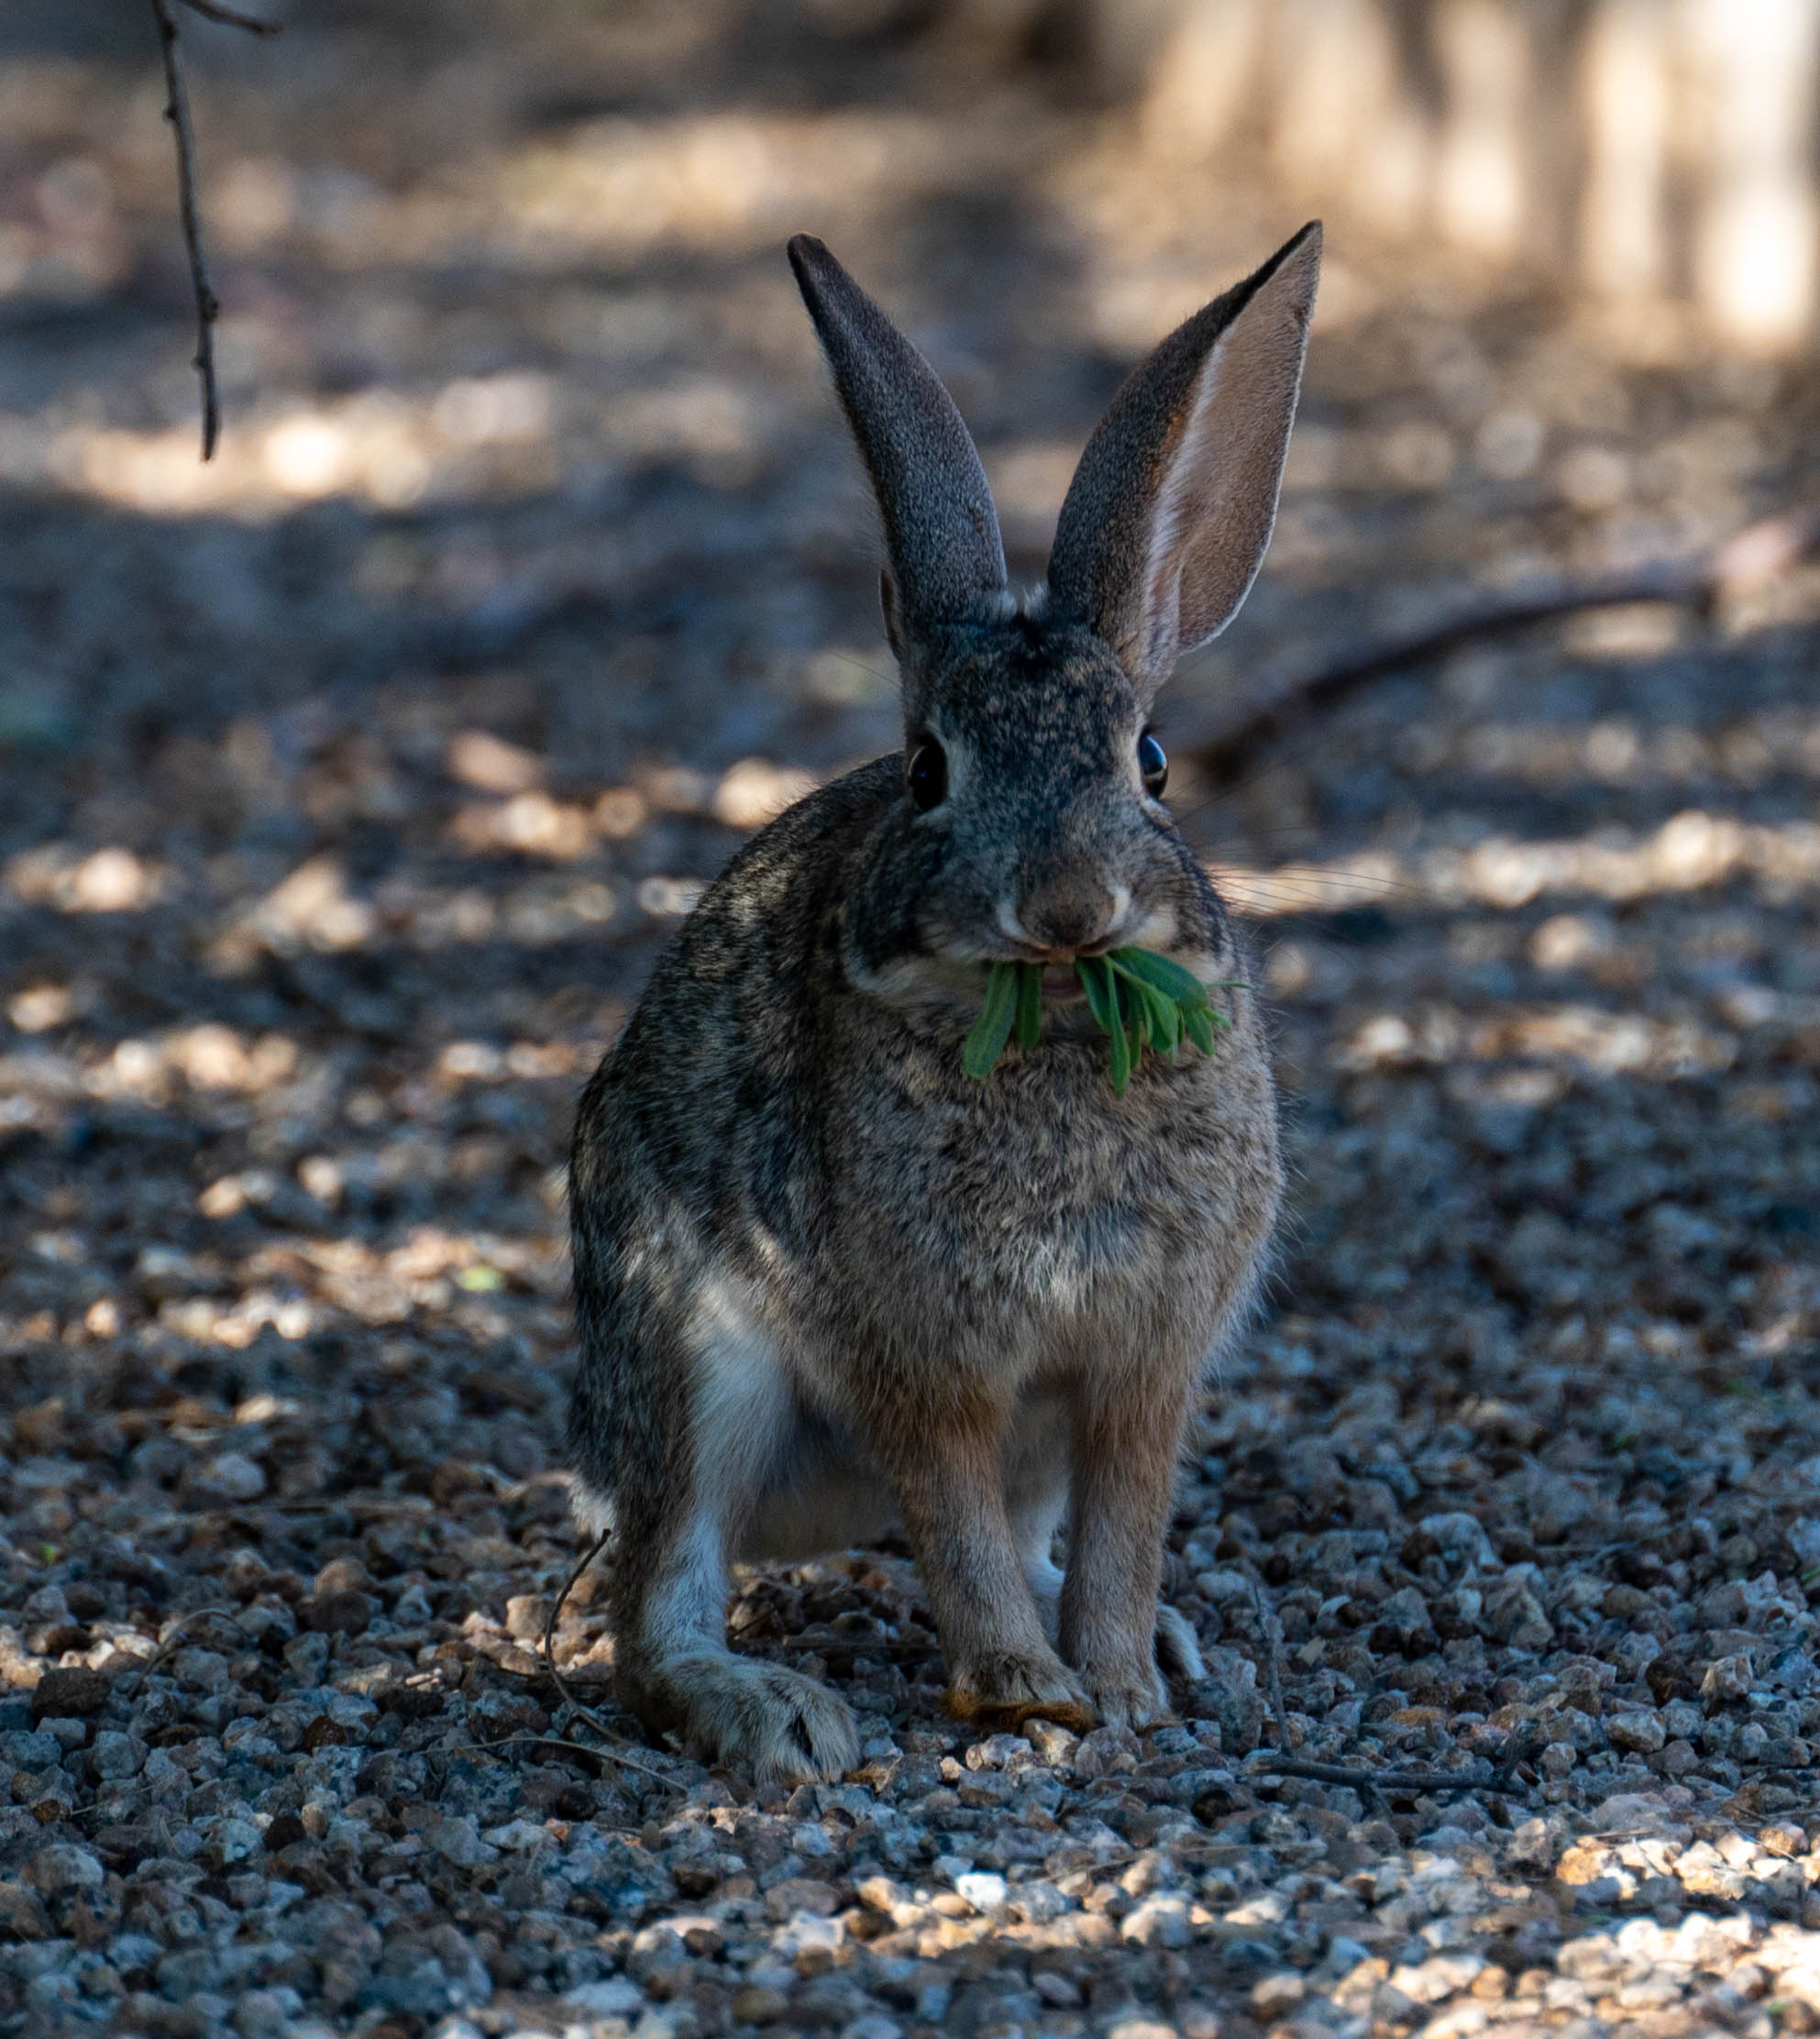 Photo by Carey nussbaum  |  Hungry Cottontail munching on greens!